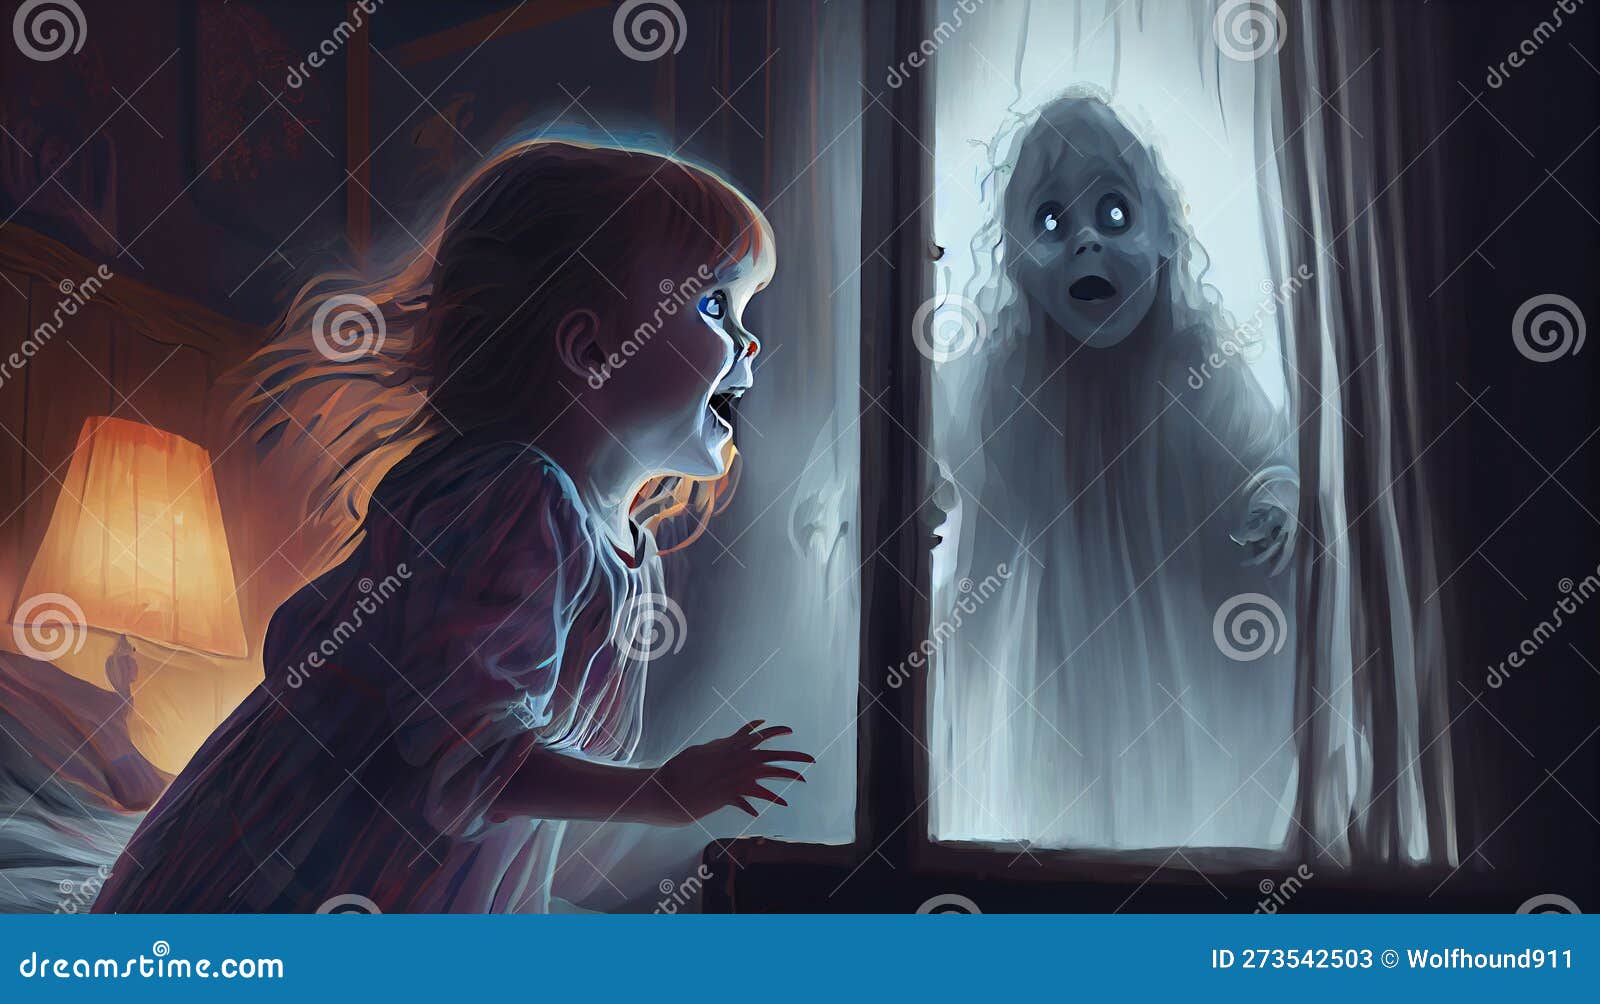 https://thumbs.dreamstime.com/z/child-scaring-to-see-ghost-digital-art-style-illustration-painting-child-scaring-to-see-ghost-digital-art-style-273542503.jpg